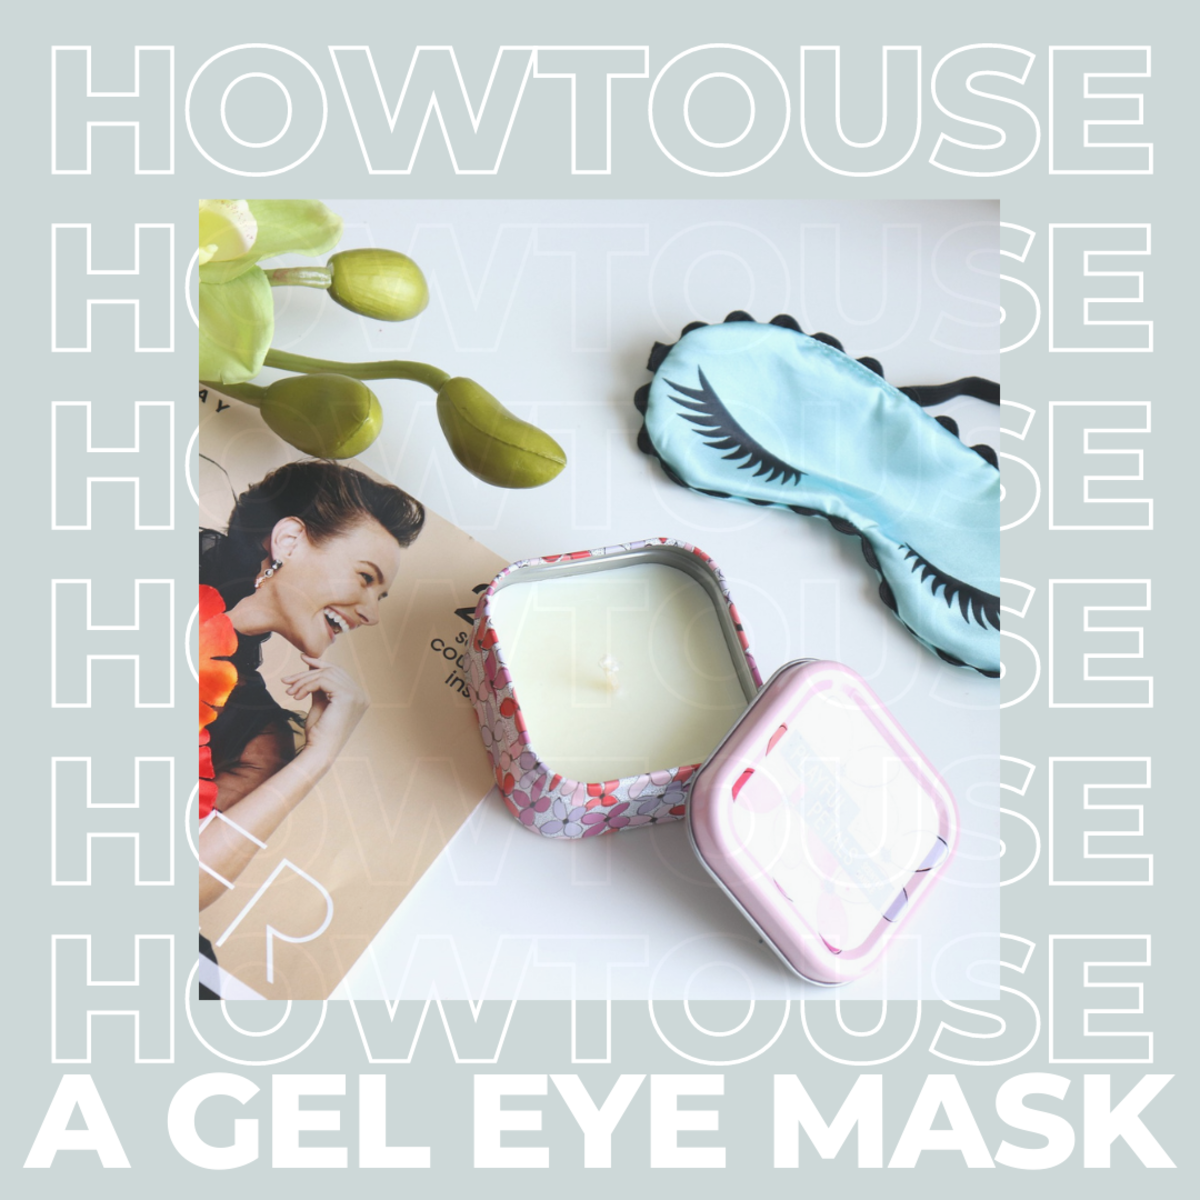 How do you use your gel eye mask?